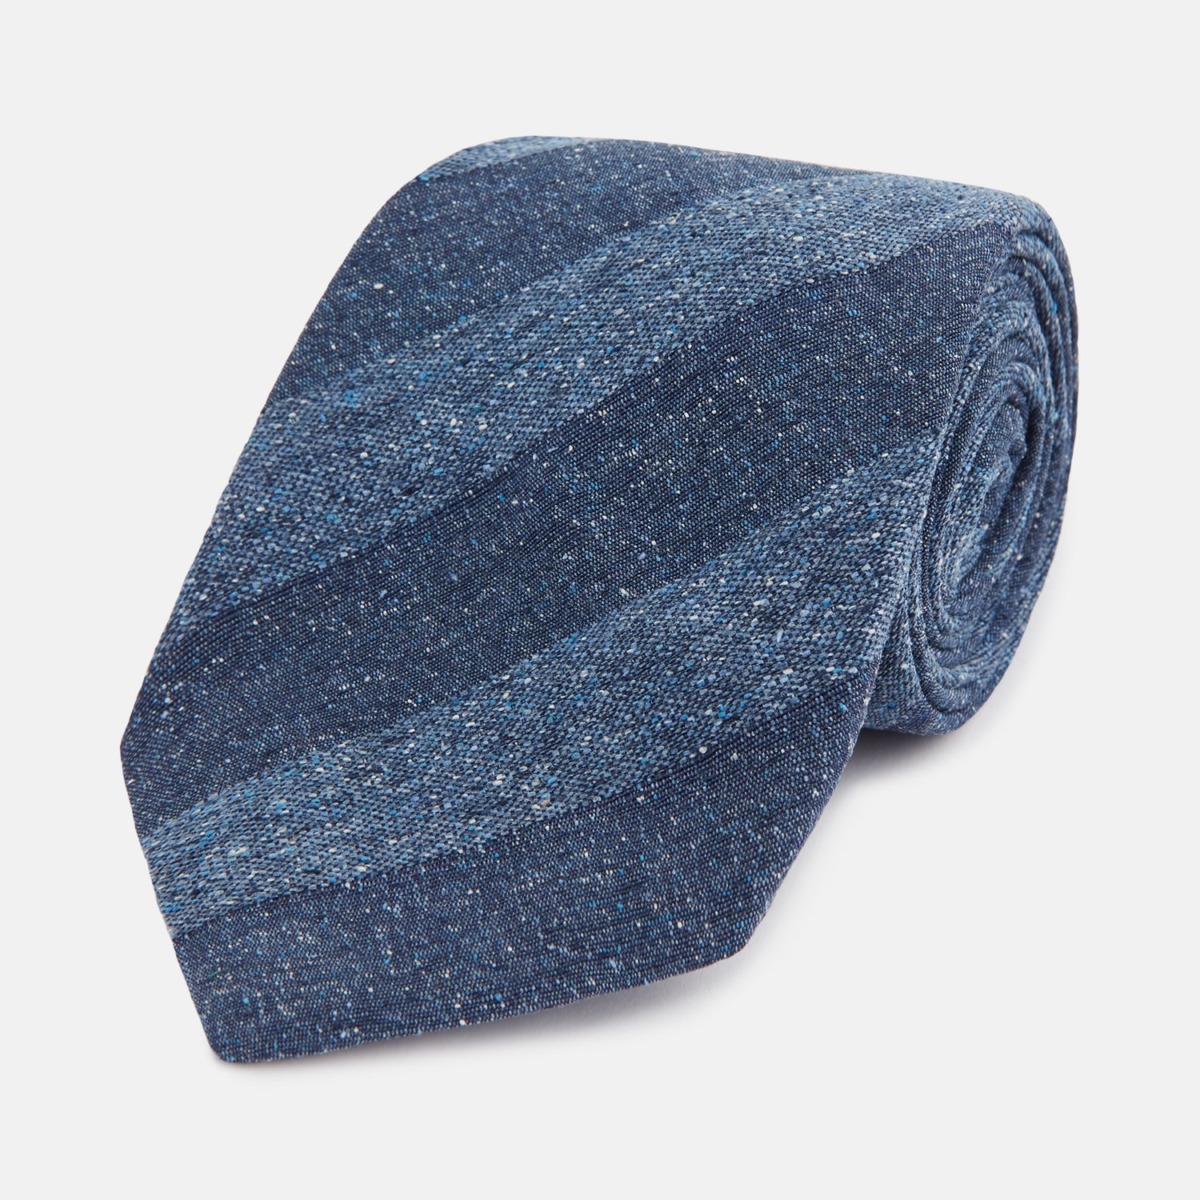 Turnbull & Asser Gents Blue Tie at Turnbull And Asser GOOFASH